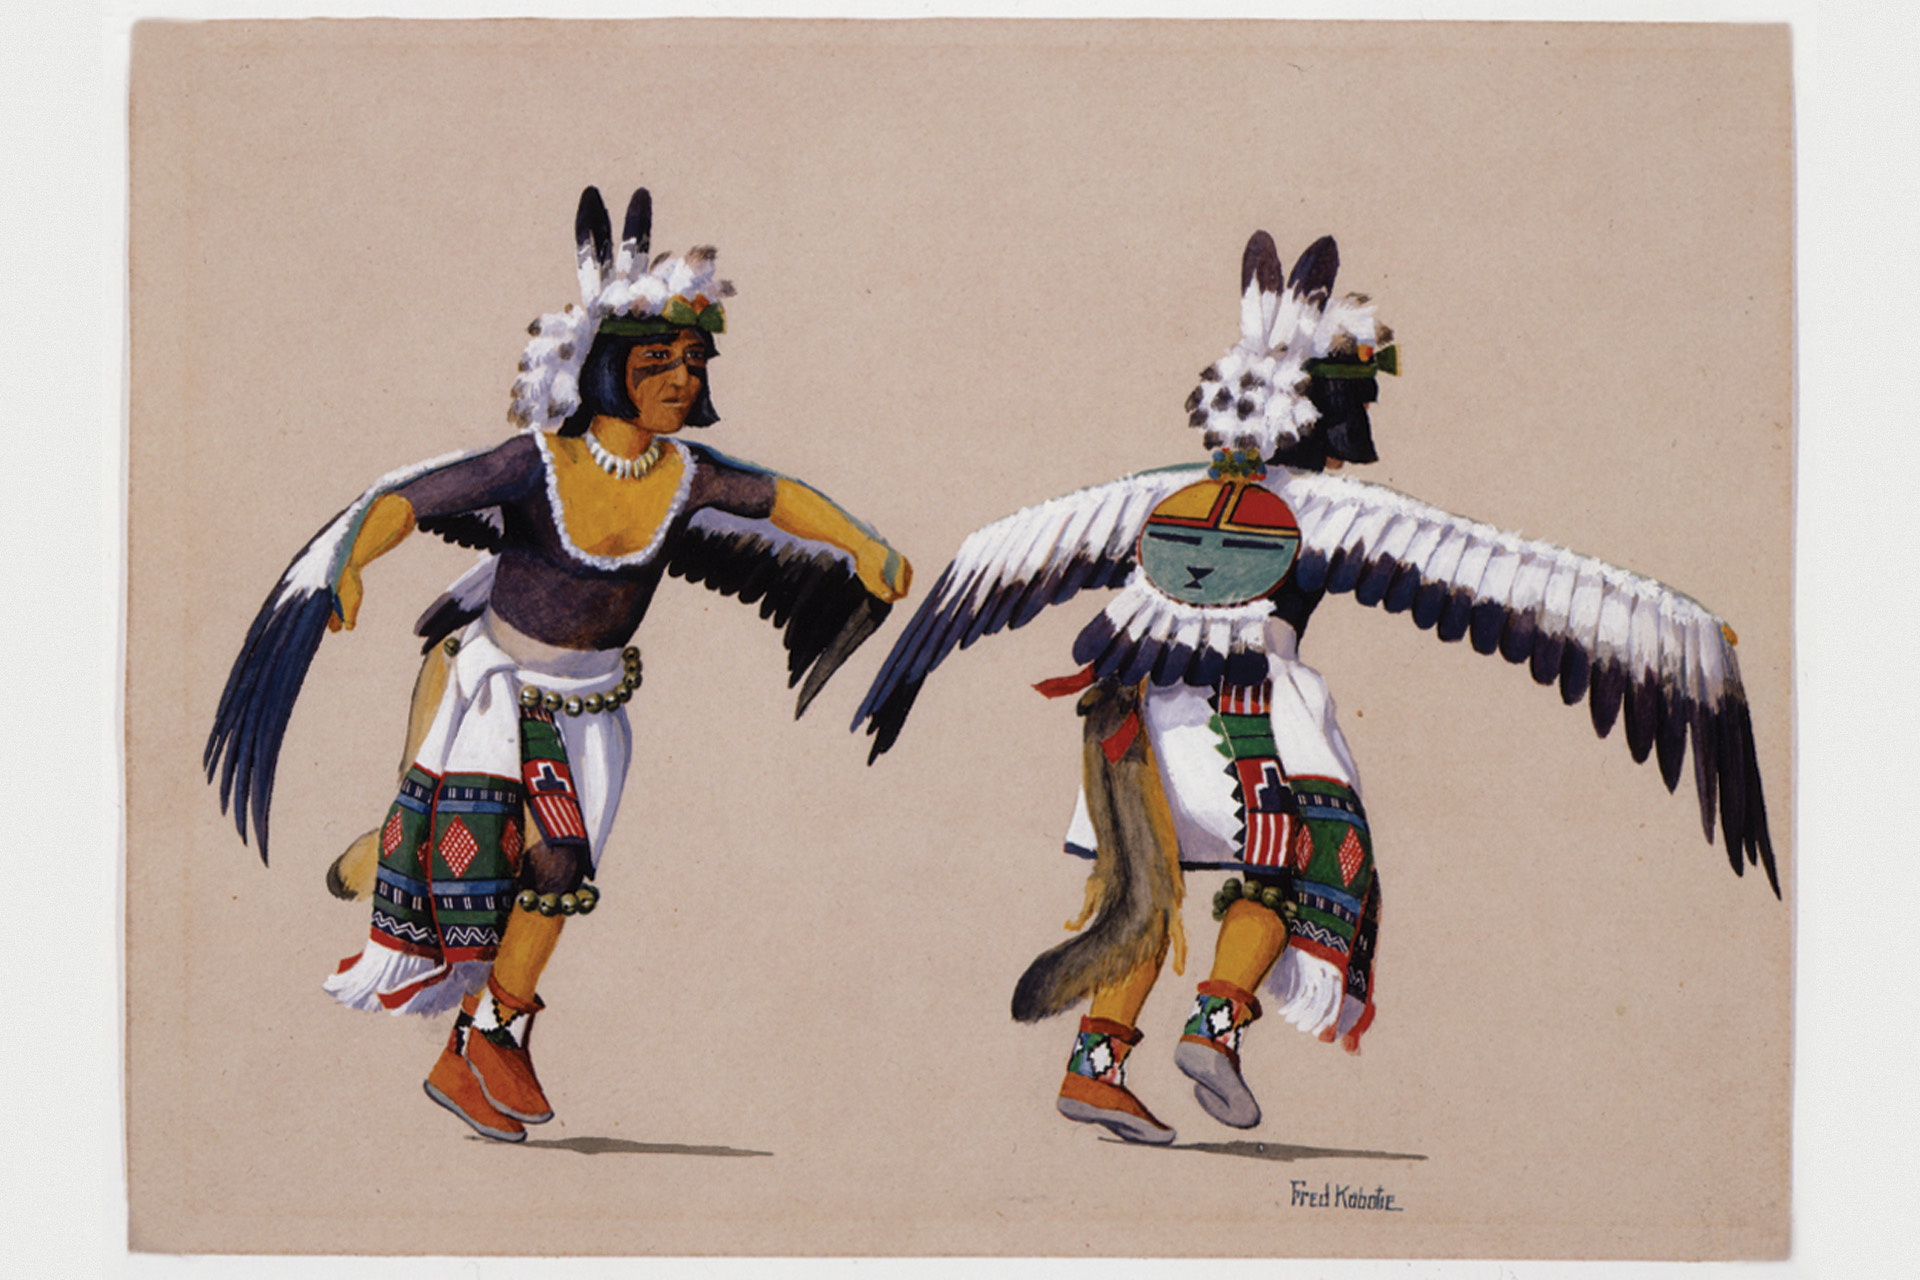 Two Native American dancers with feathered wings and headdresses.